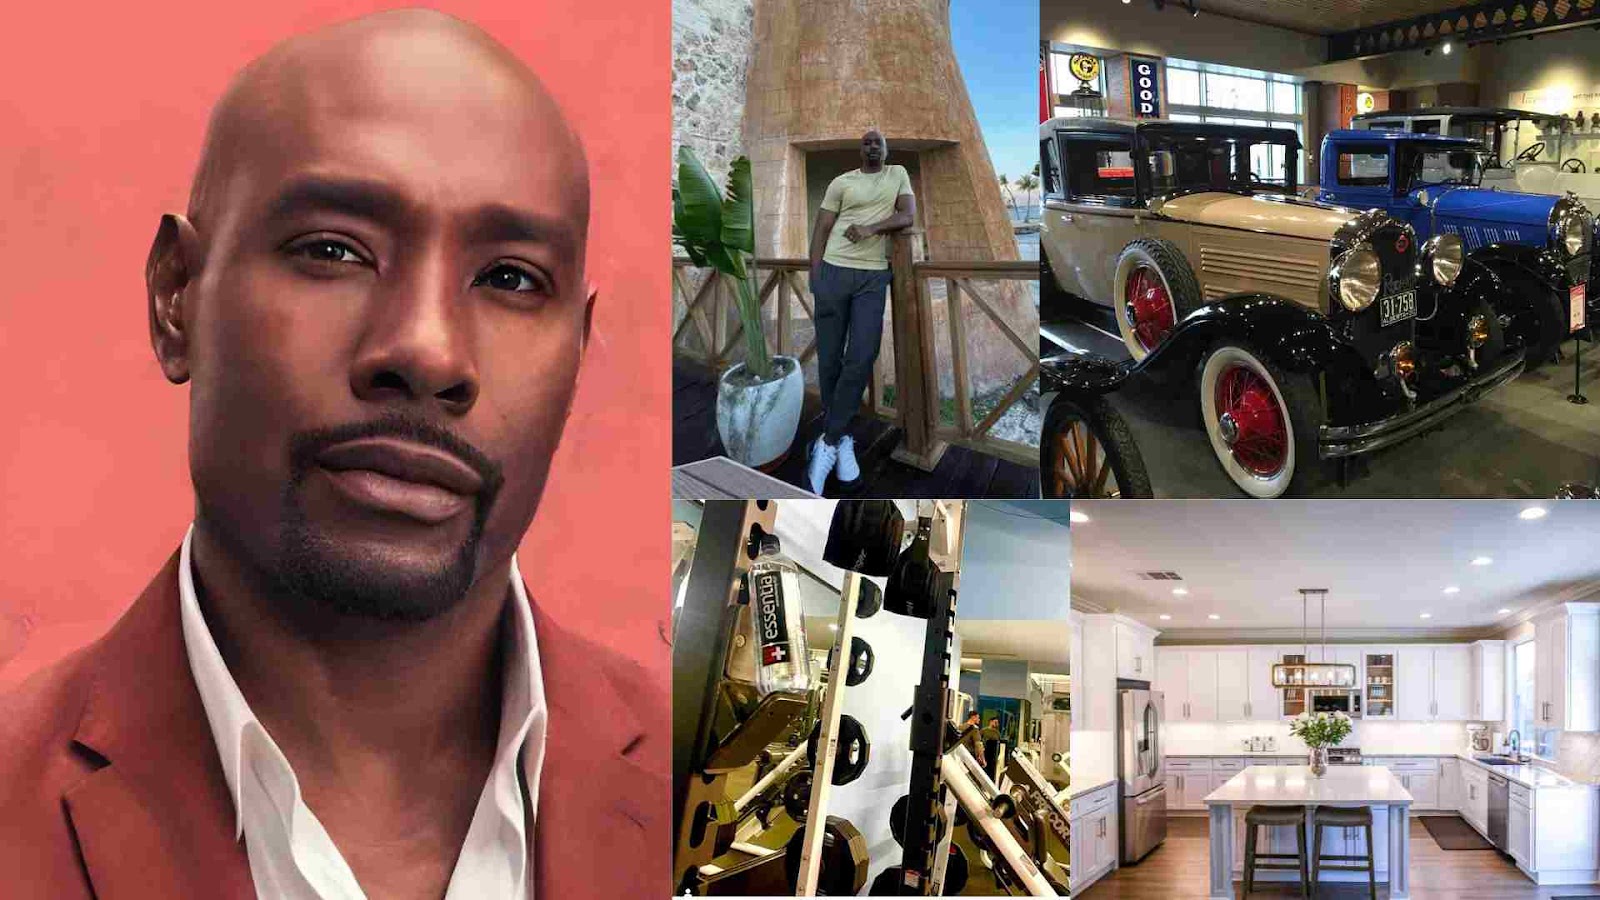 Where Did Morris Chestnut Spend his Earnings?